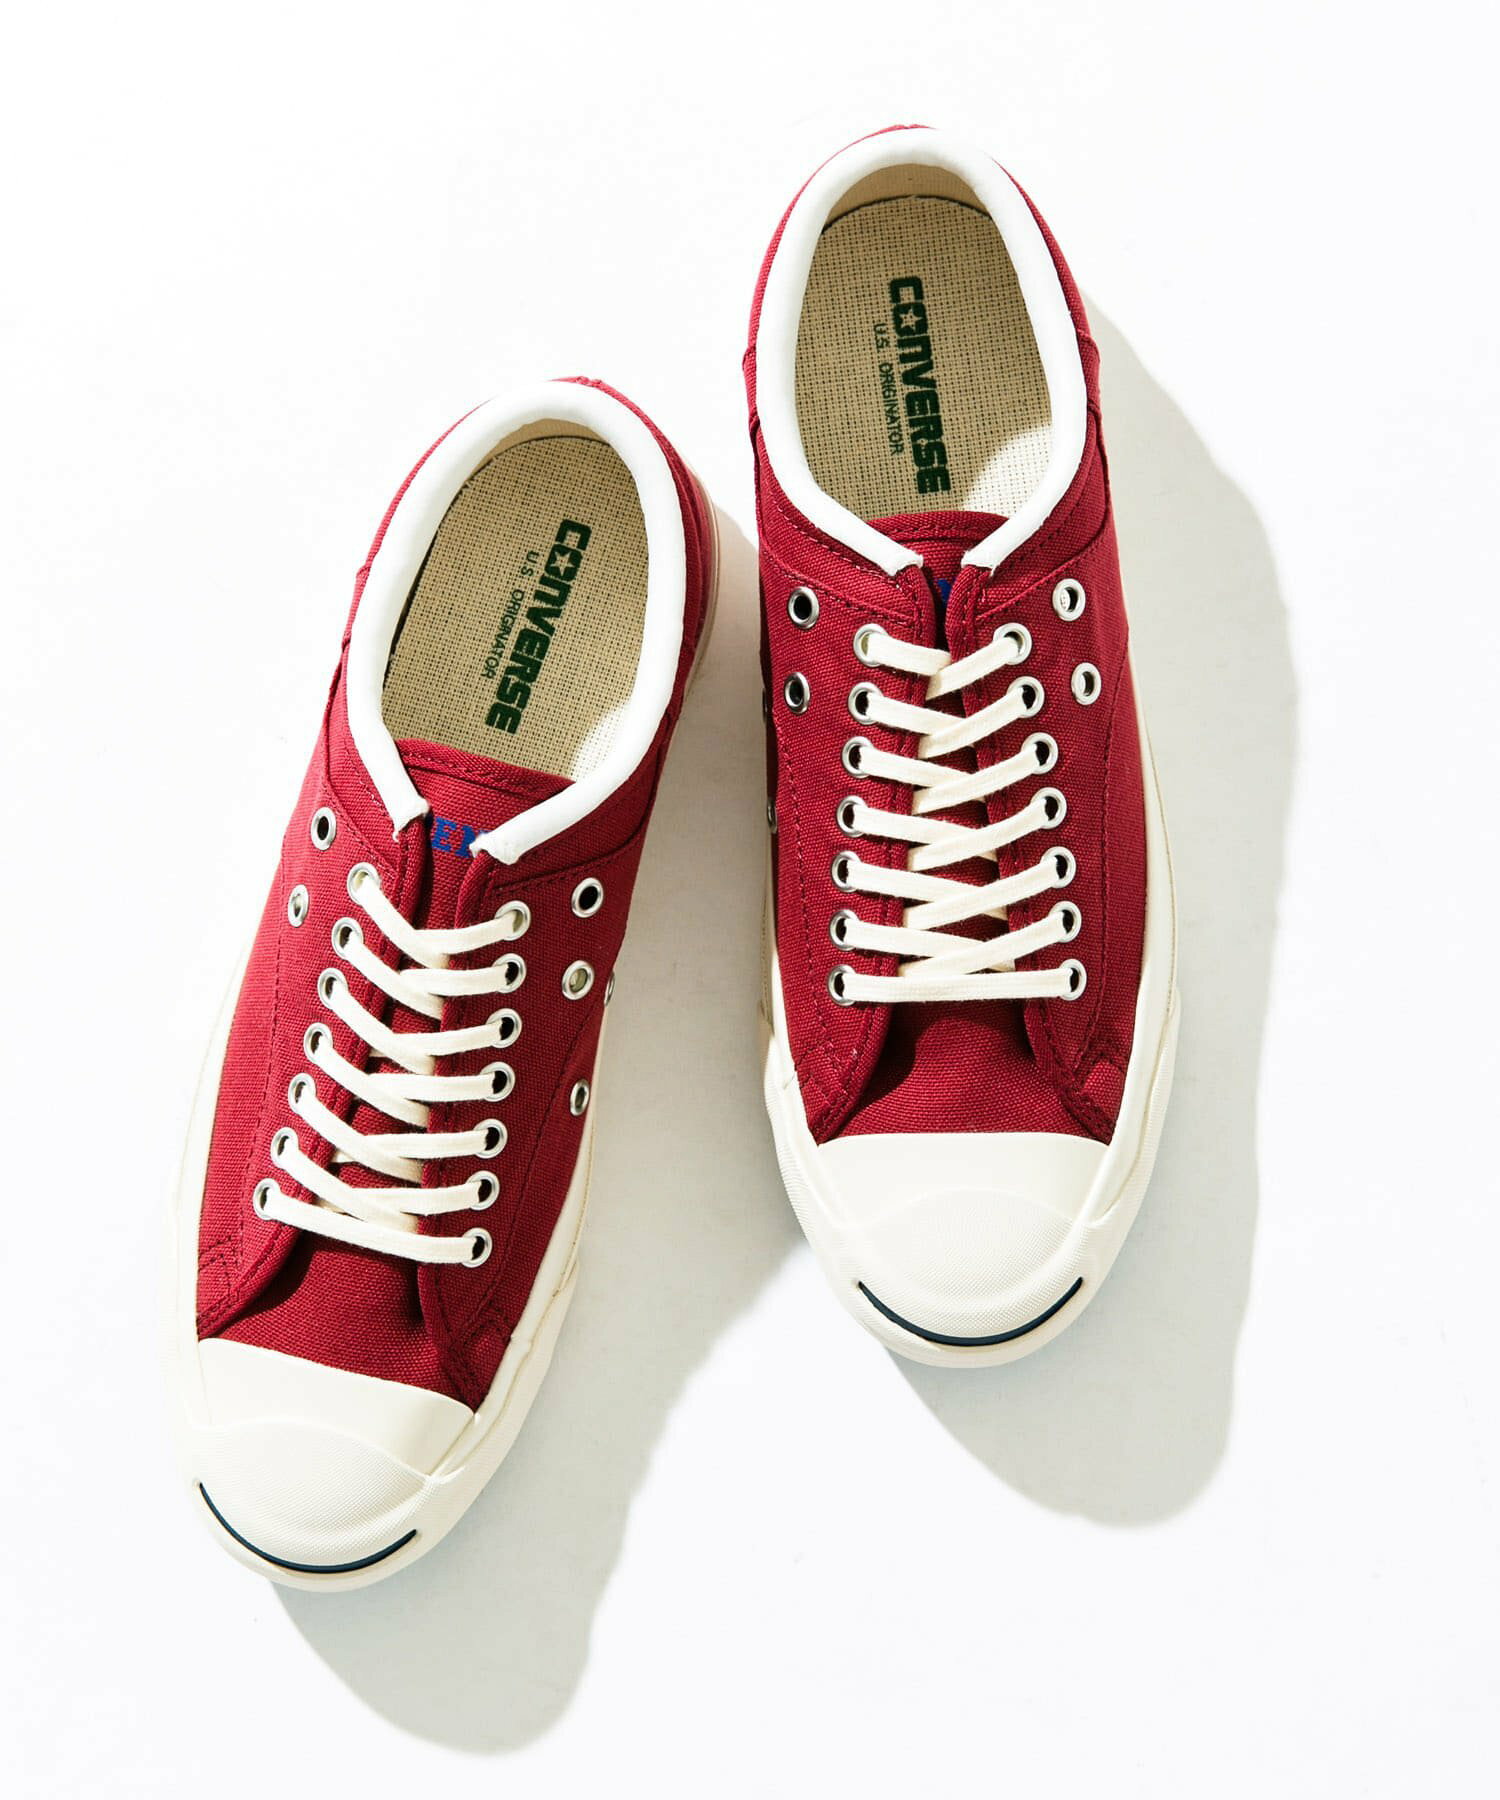 CONVERSE JACK PURCELL US RLY IL